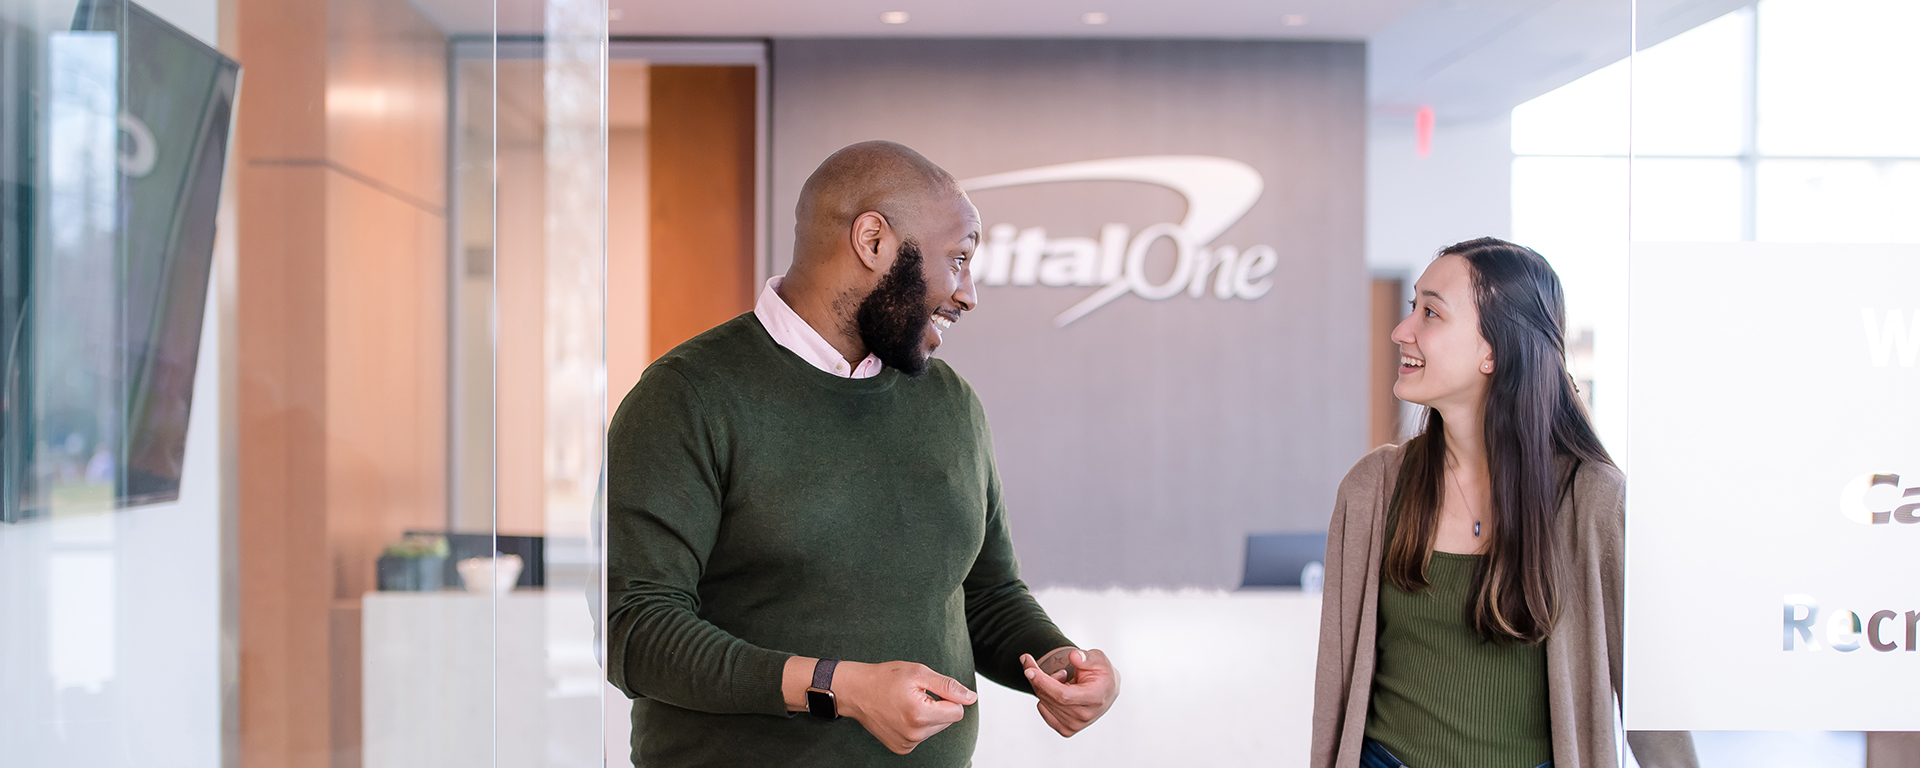 Capital One associates talk about tips to ace their case interview for analyst job interviews